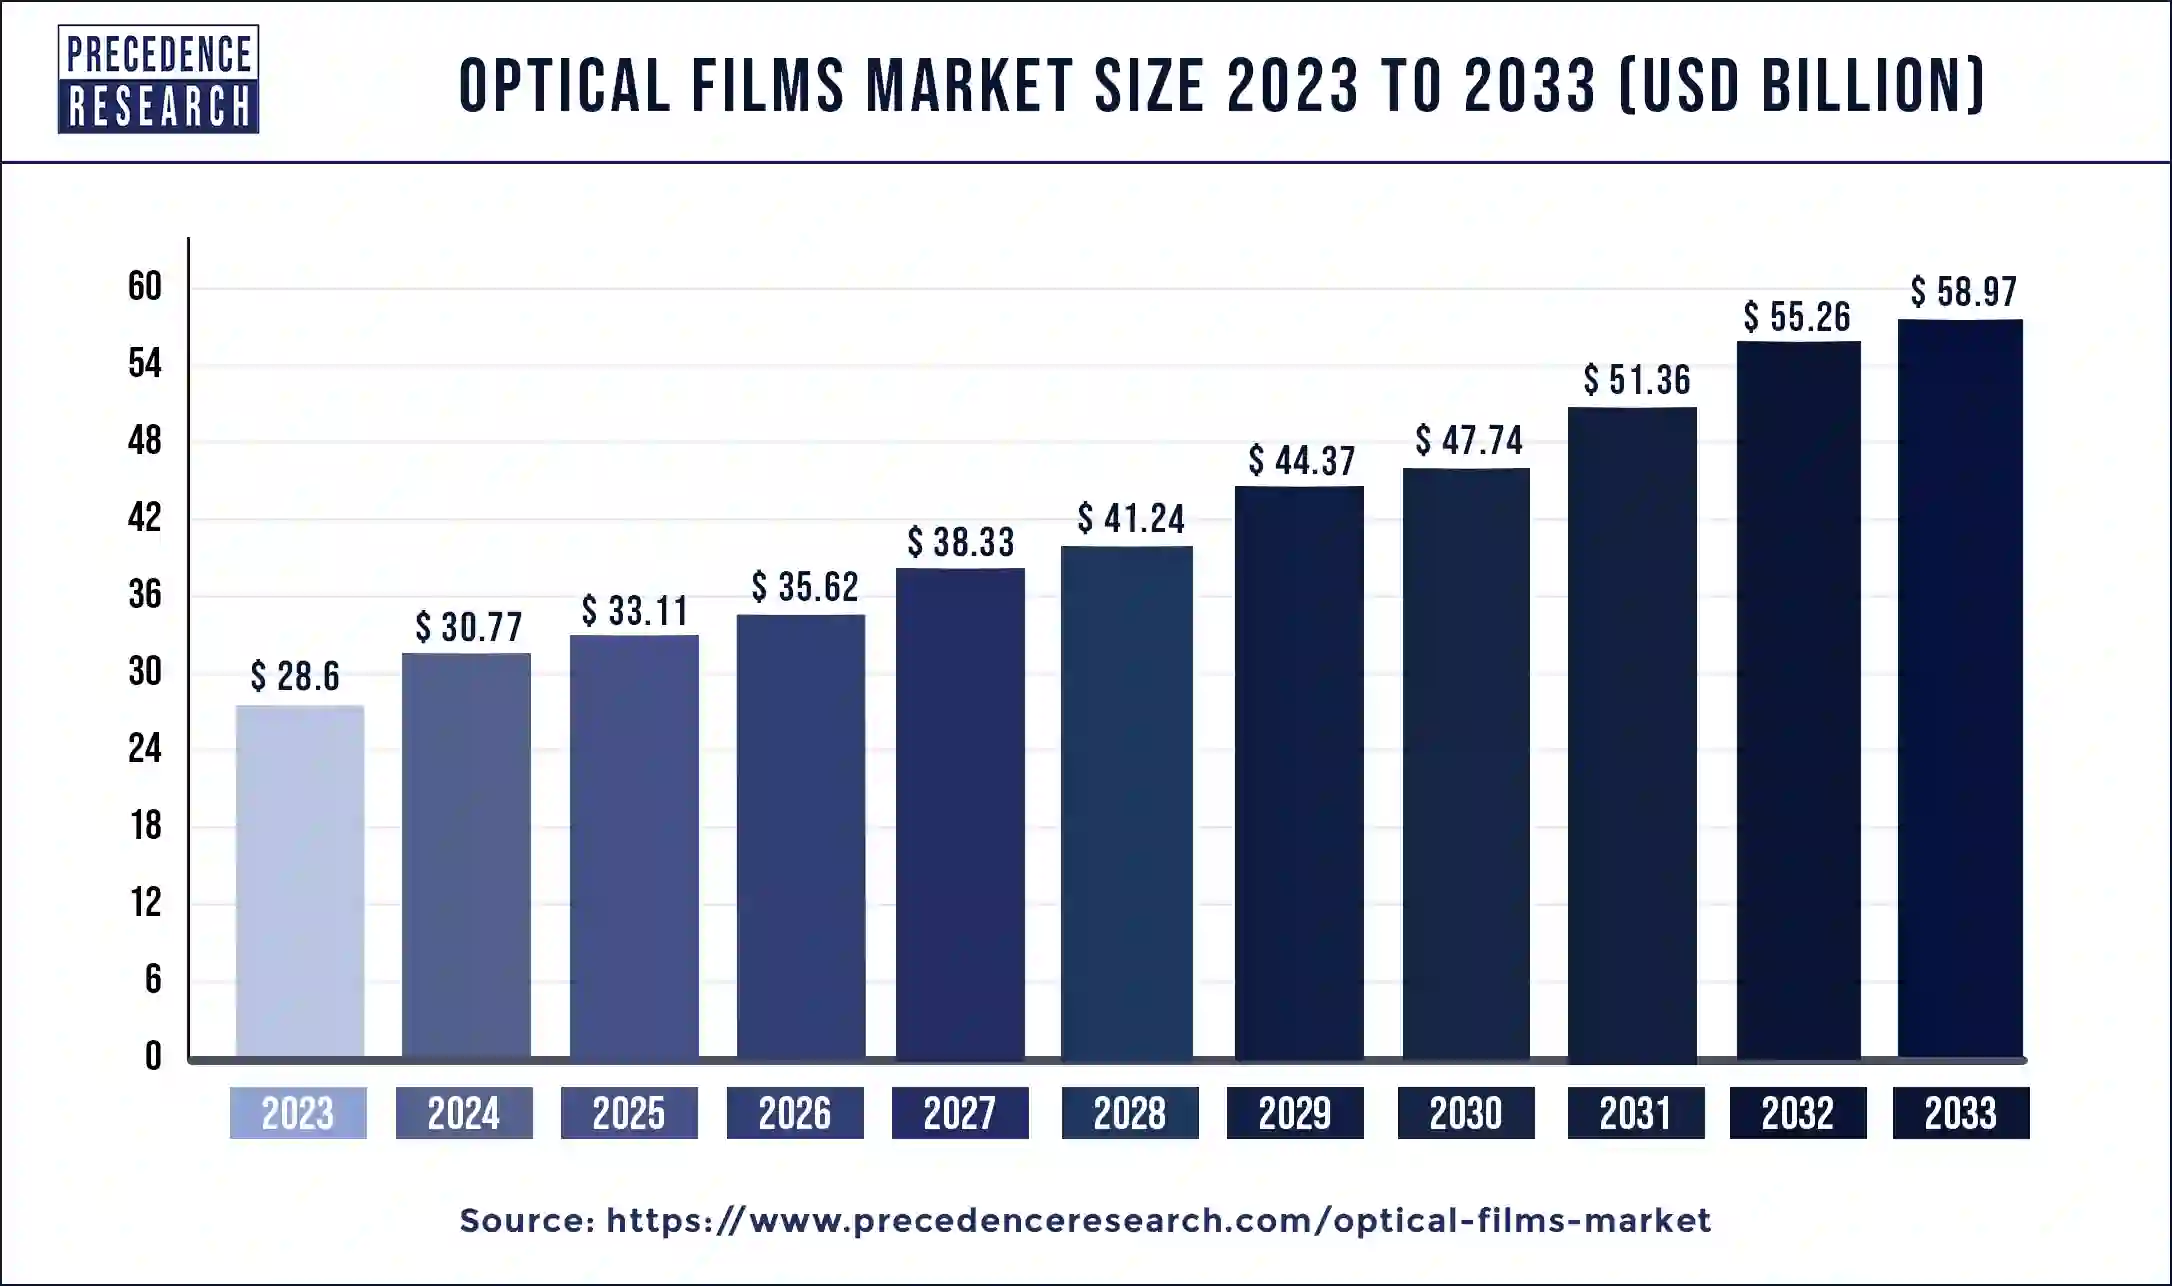 Optical films Market Size 2023 To 2033